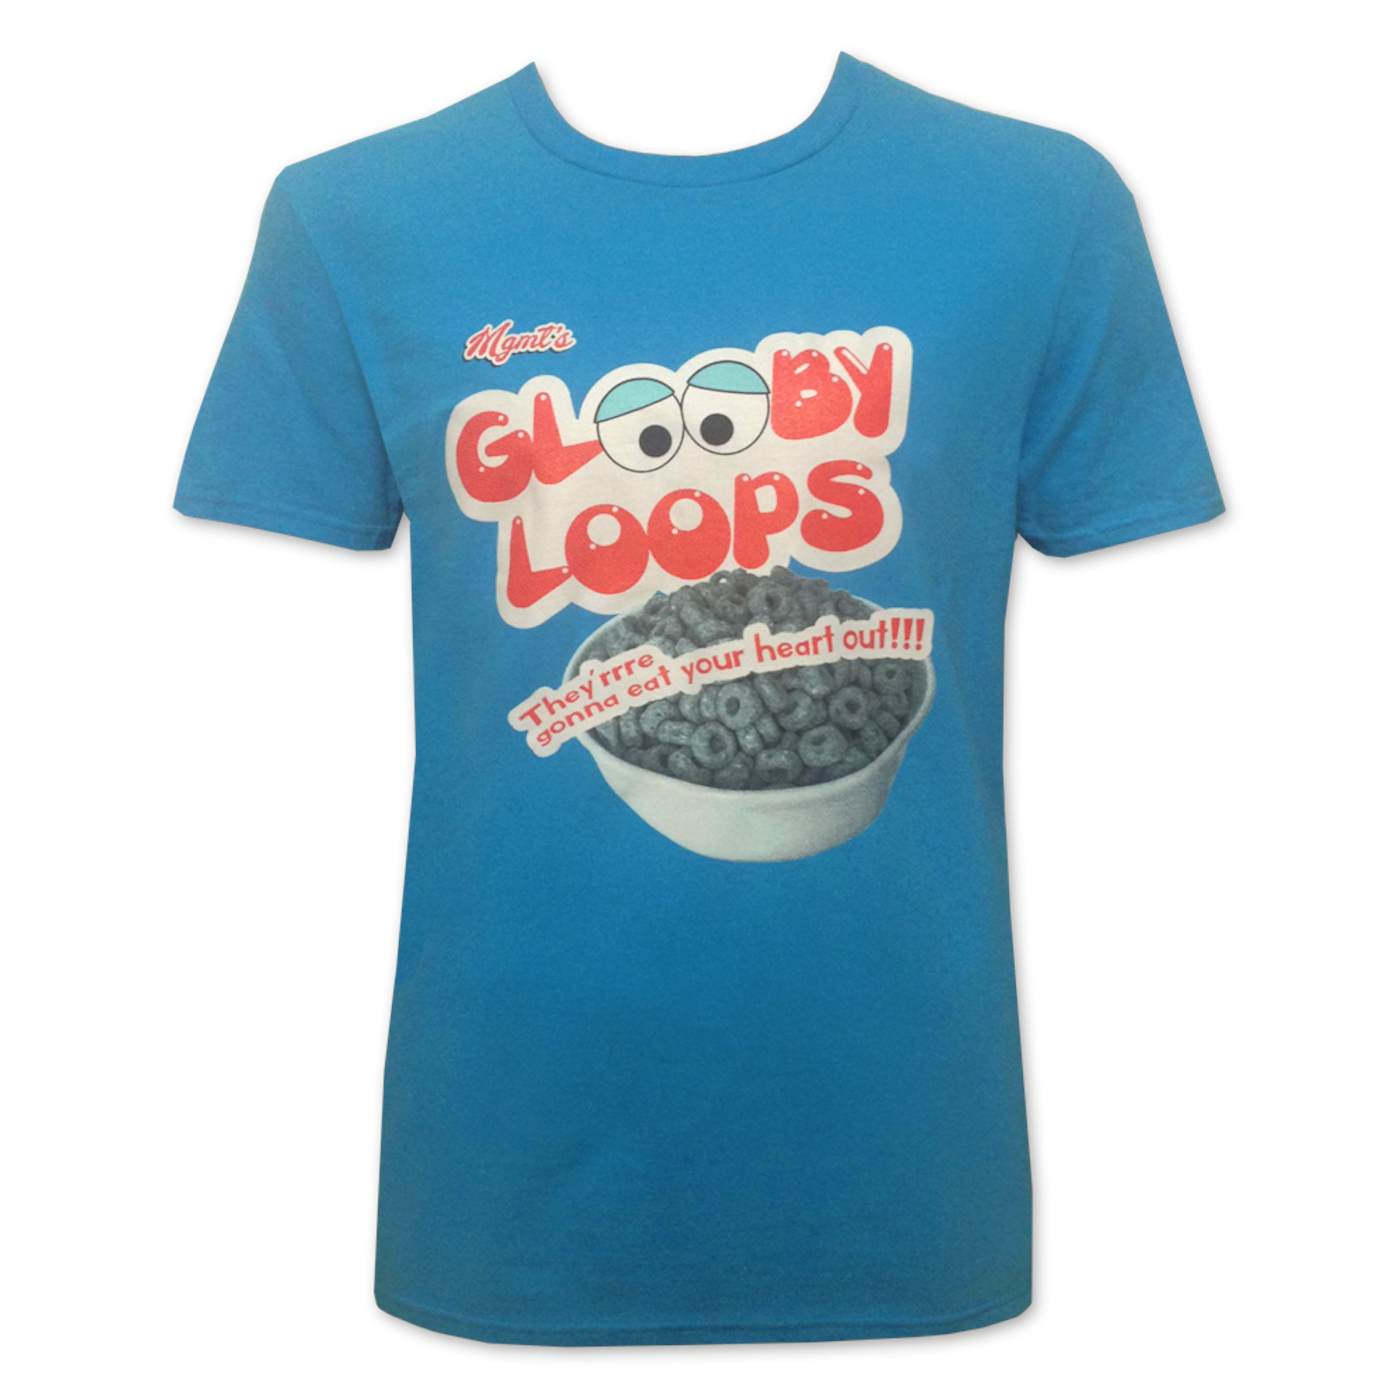 MGMT Glooby Loops T-shirt